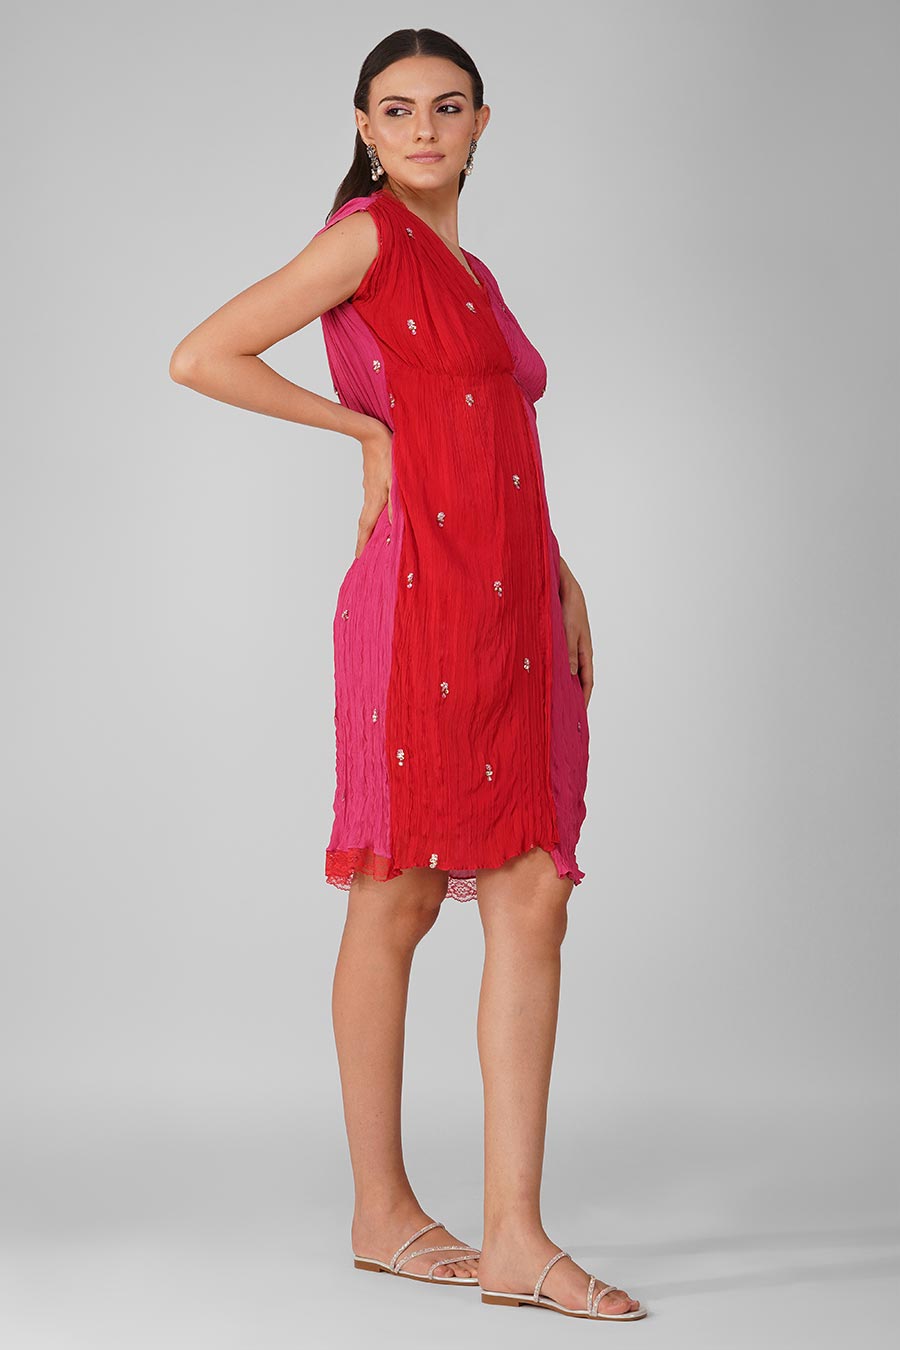 Red-Pink Knotted Dress